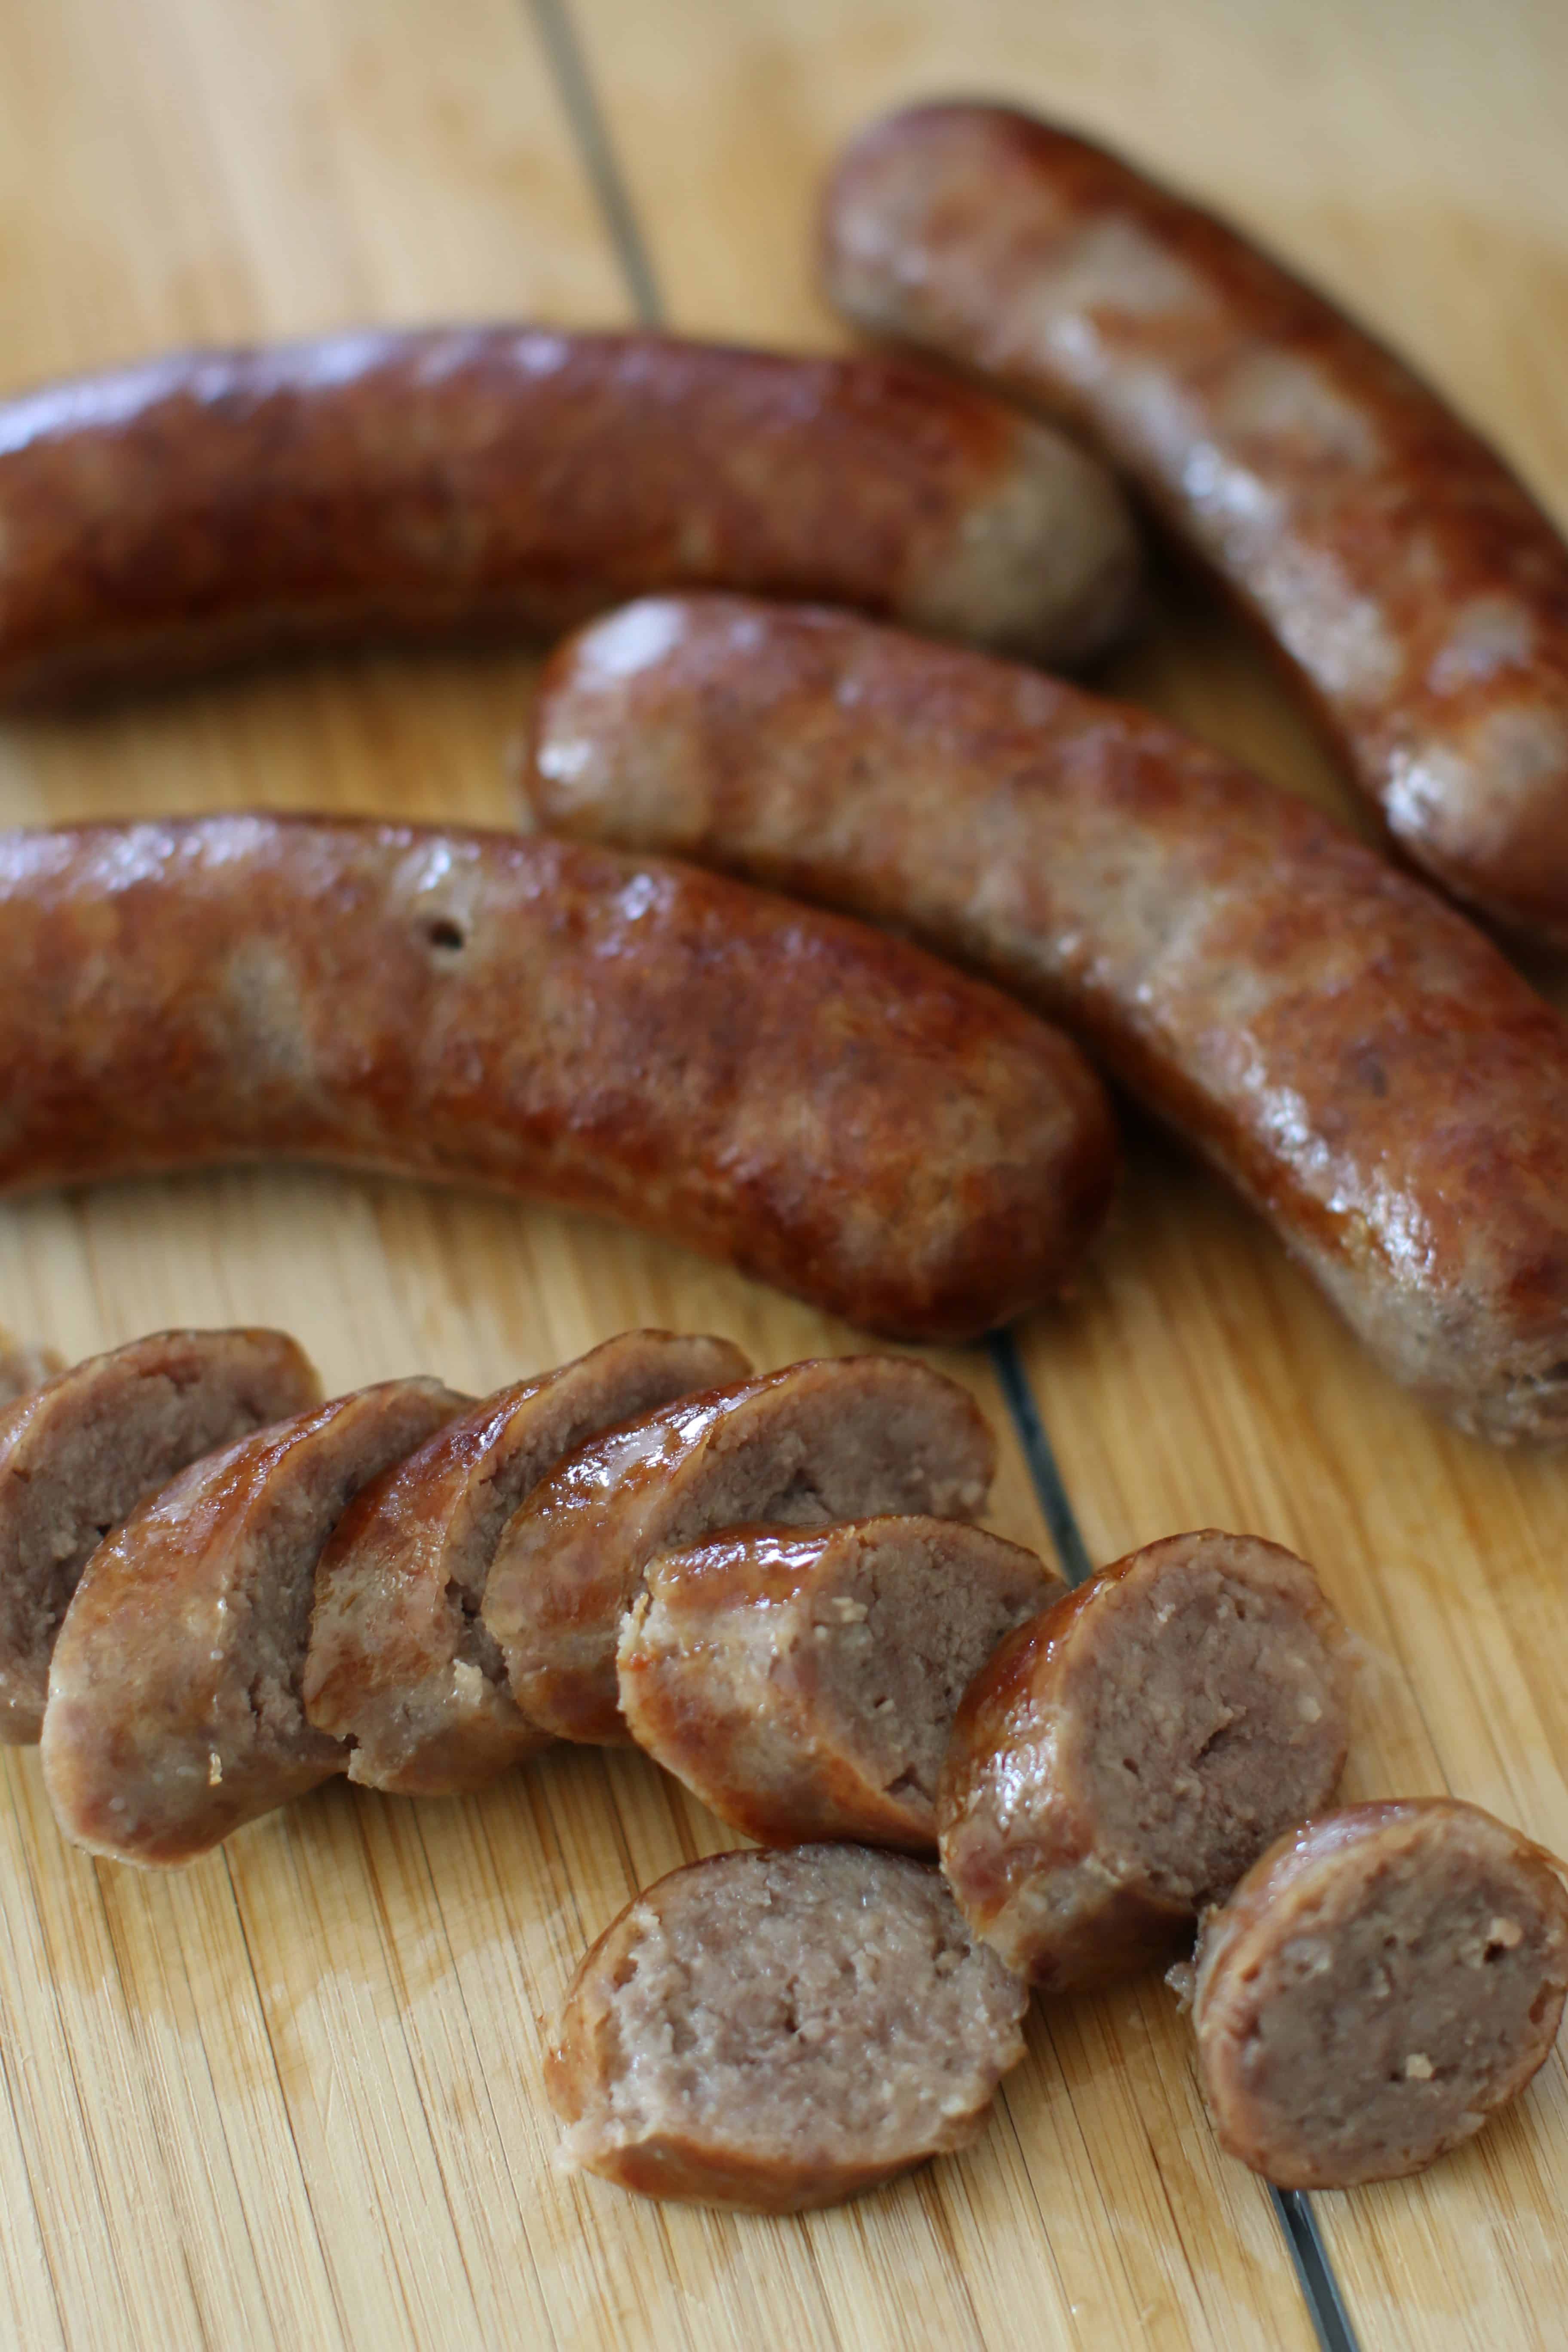 cooked, sliced beer brats.